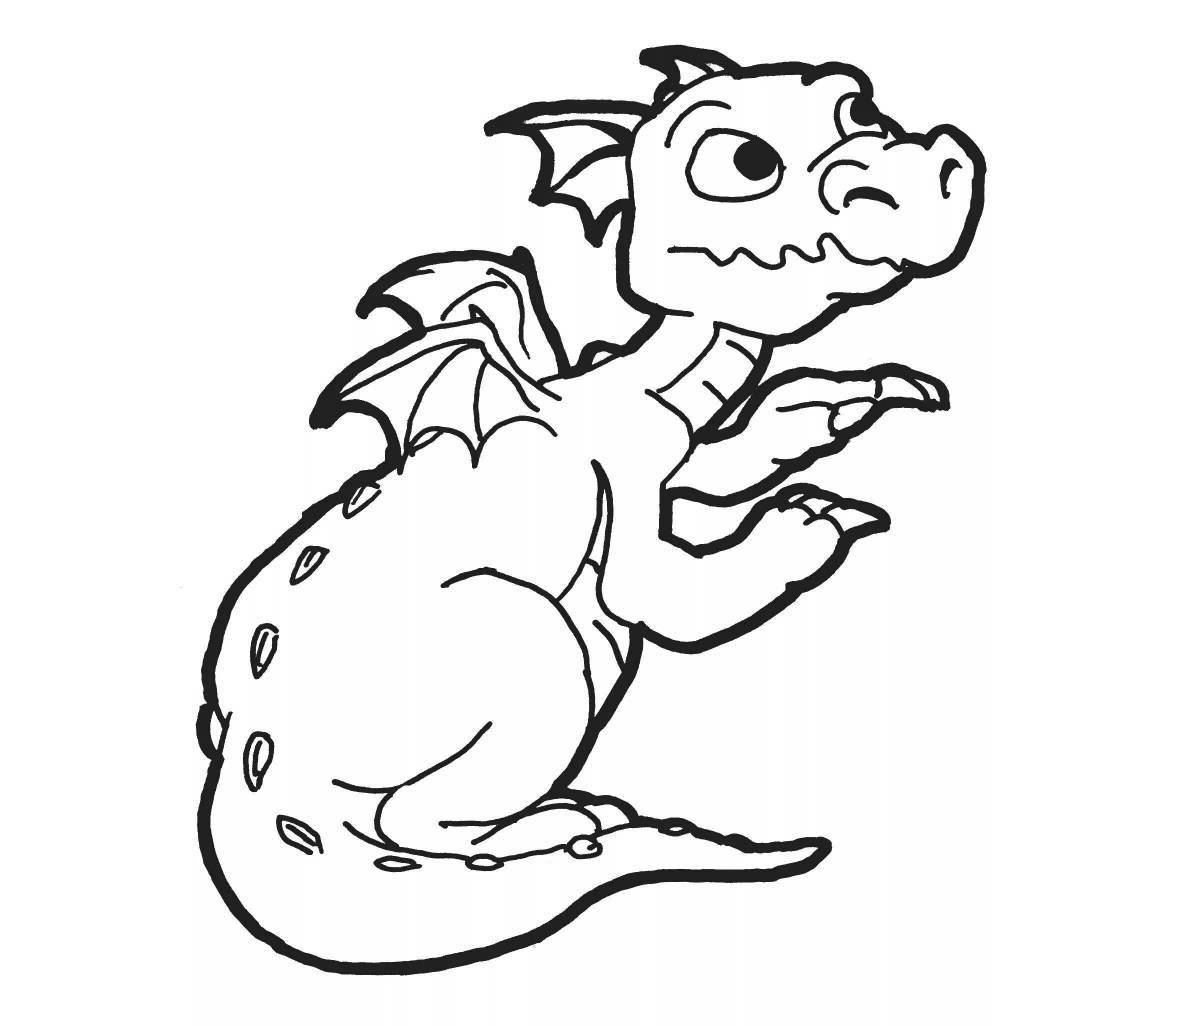 Amazing dragon coloring pages for kids